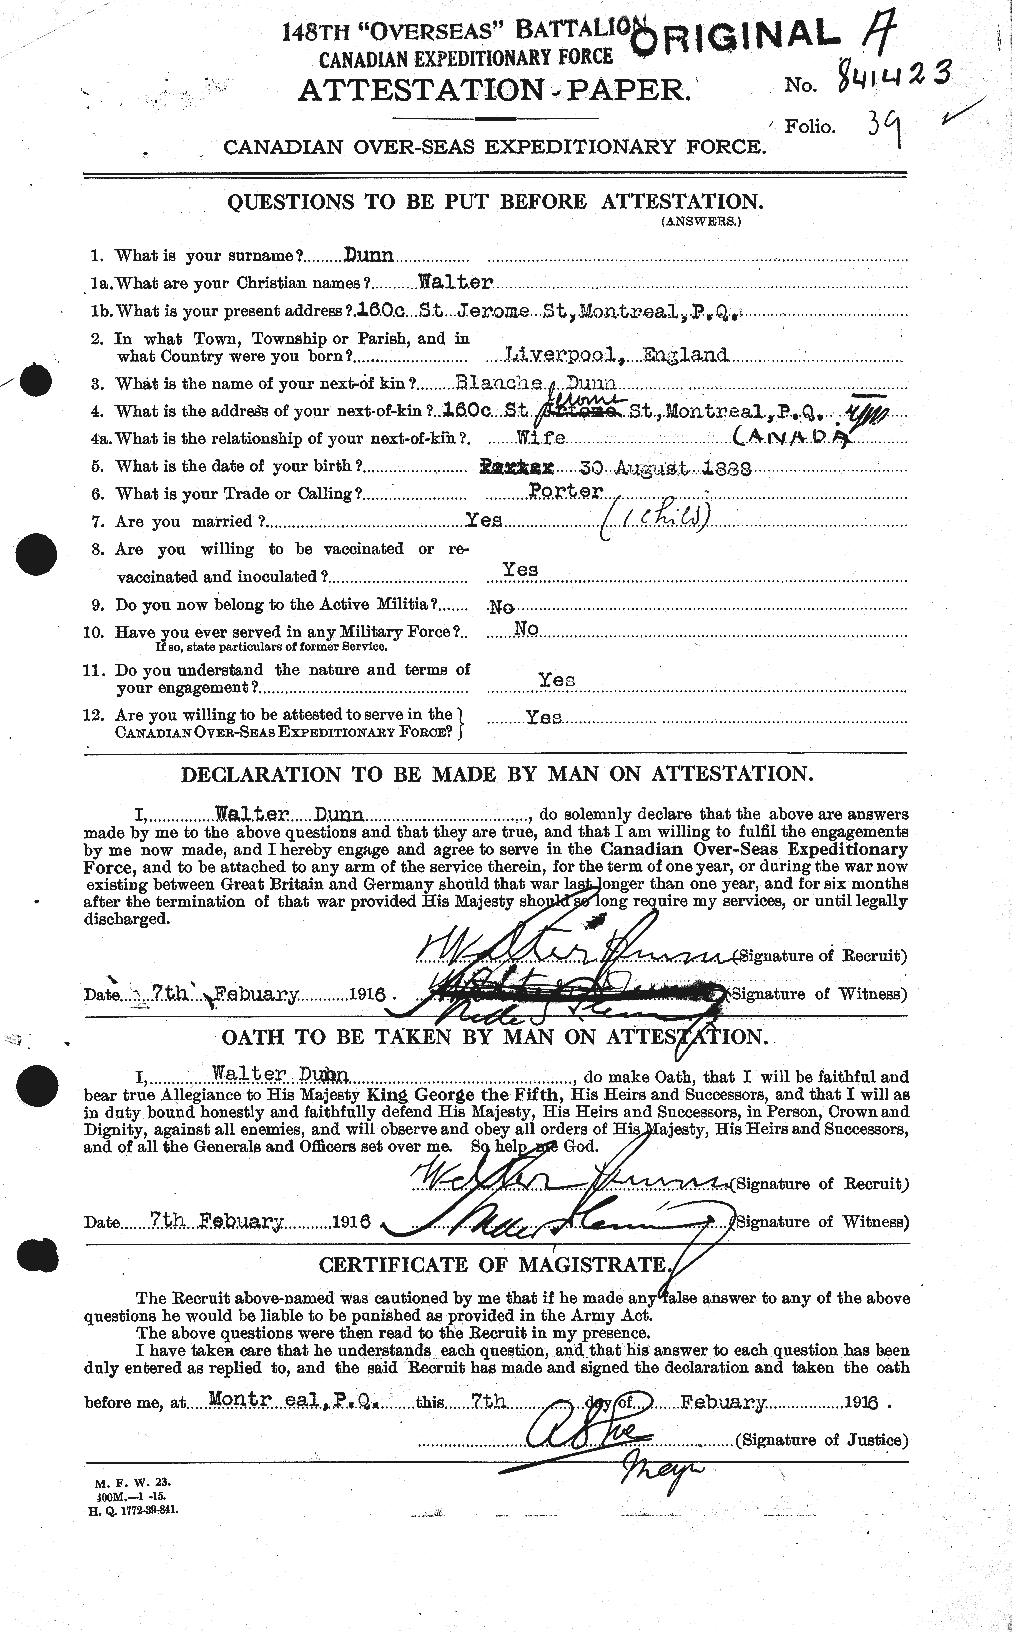 Personnel Records of the First World War - CEF 302835a